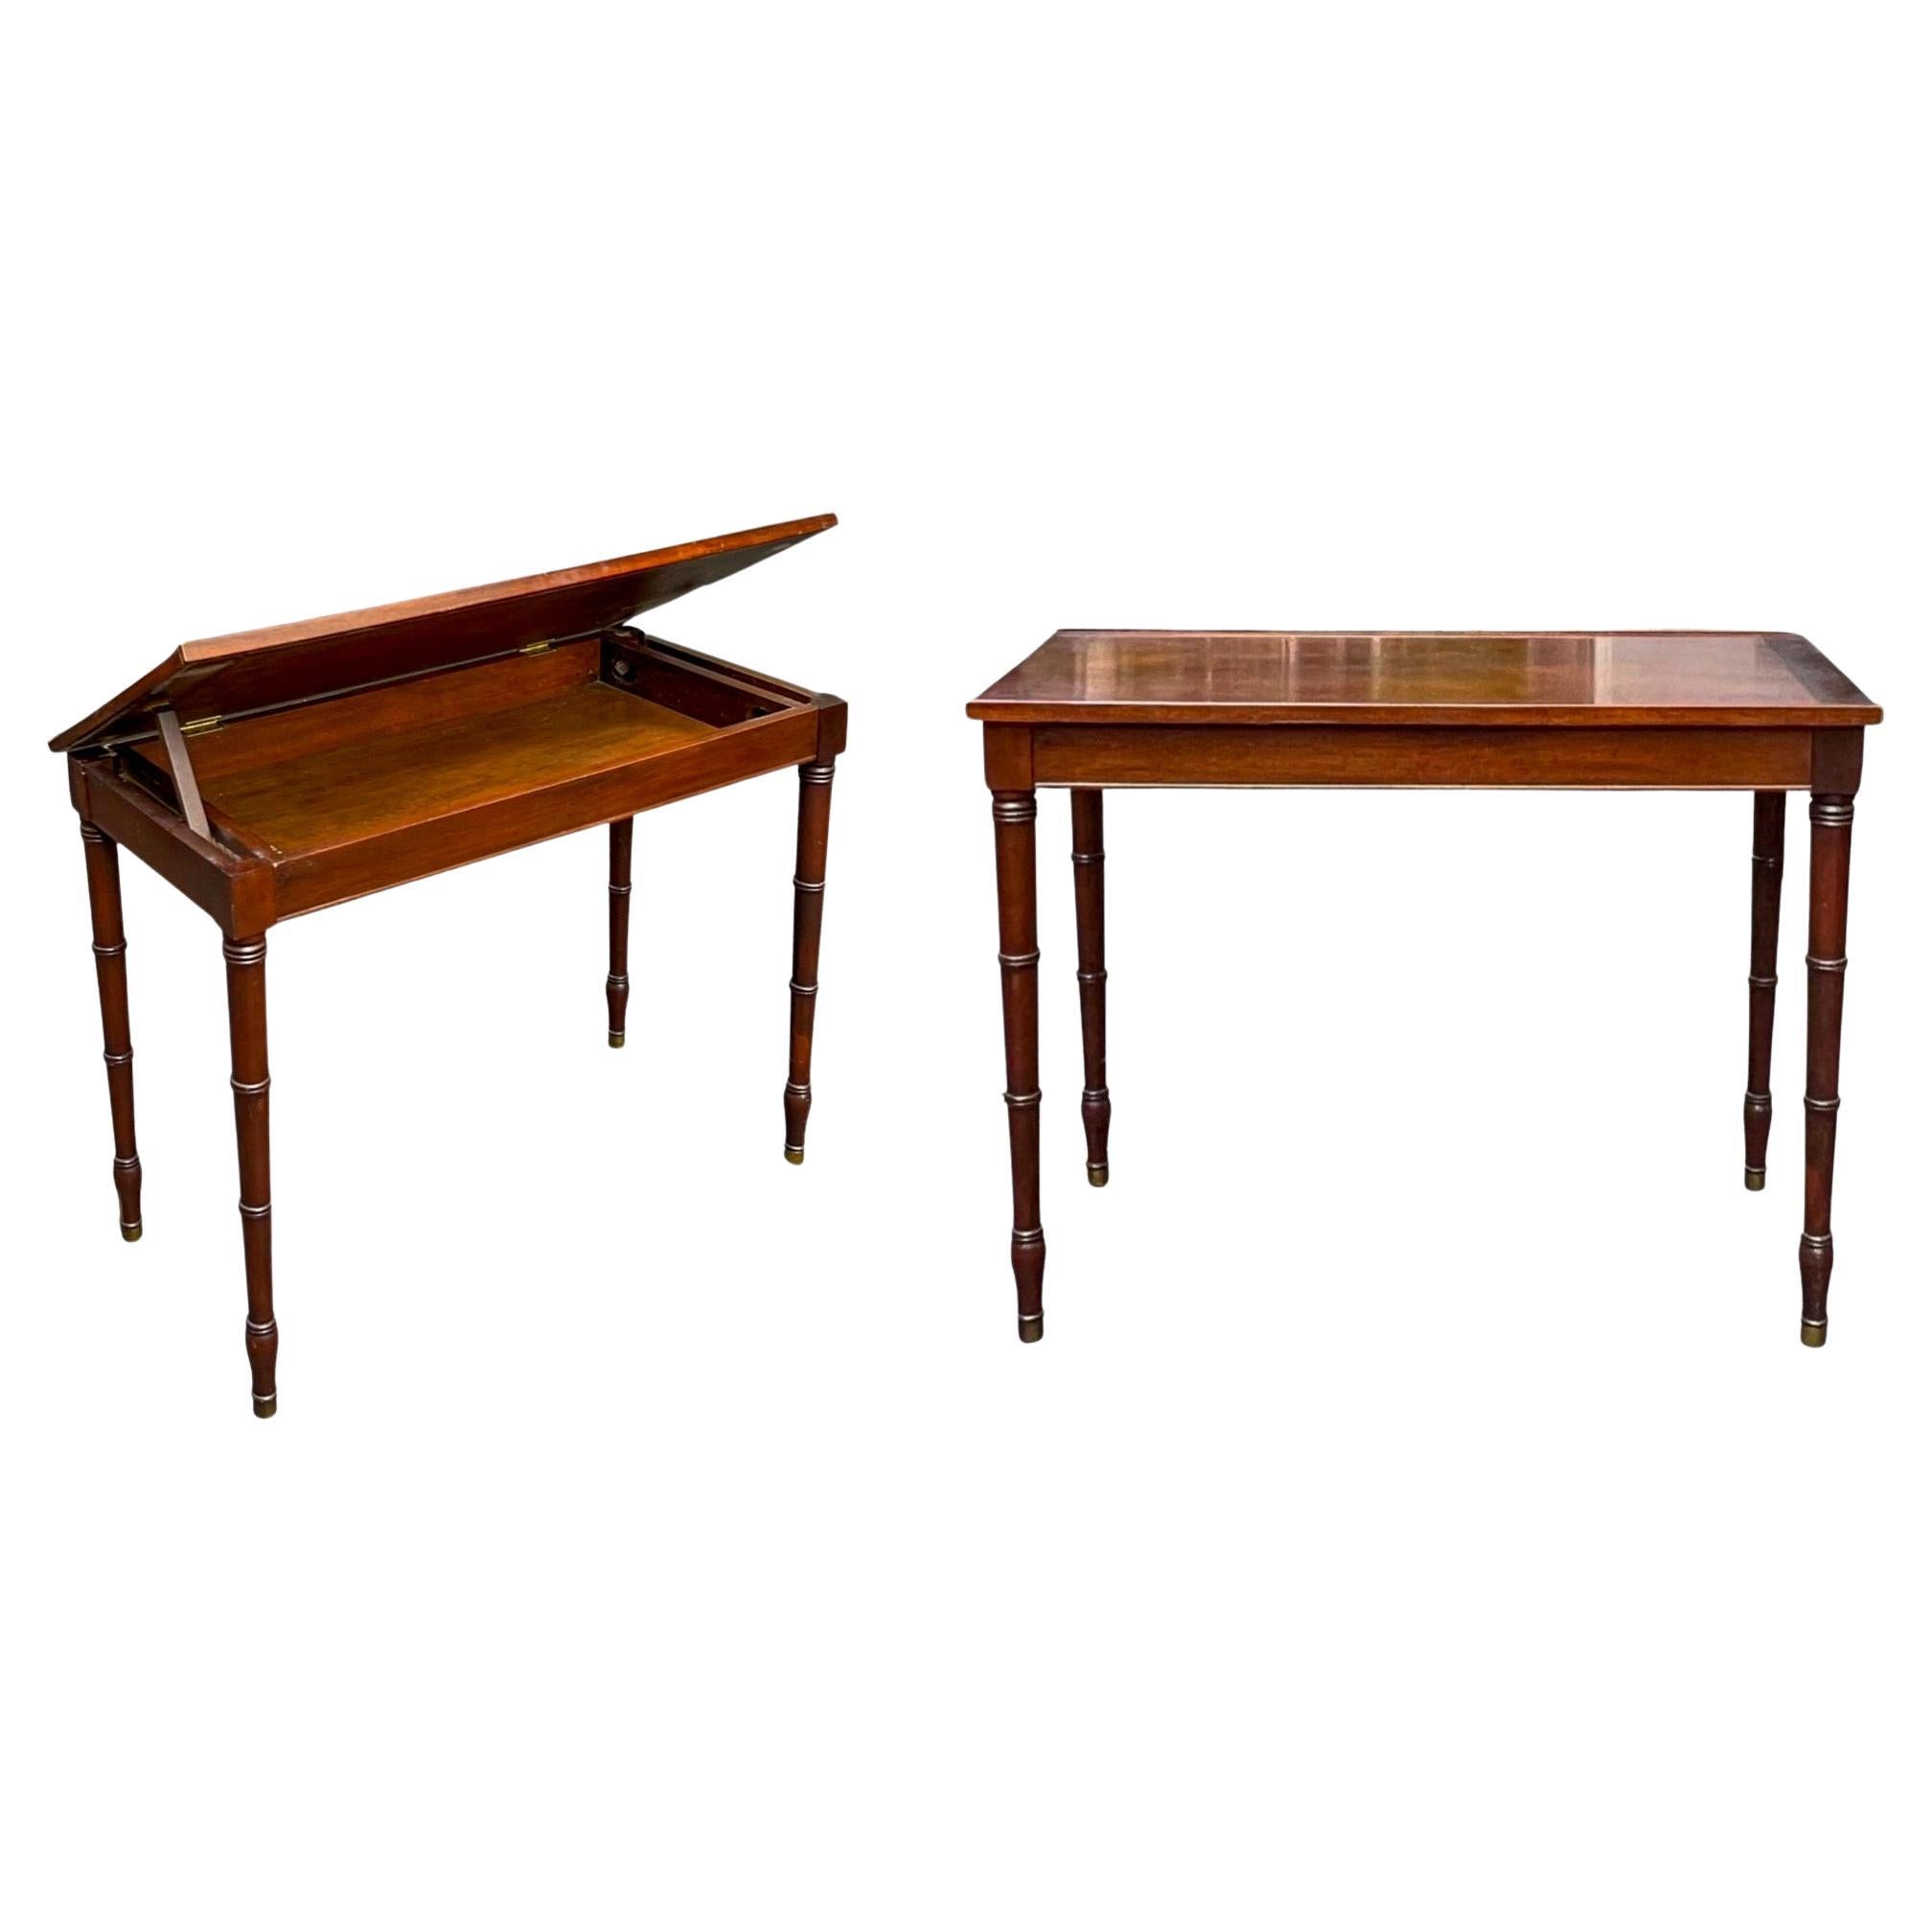 We the words “form and function” are used to describe an item, they must have been thinking of these! This is a pair of 19th century carved mahogany faux bamboo side tables. I love the lift tops that could be used for homework and other things that